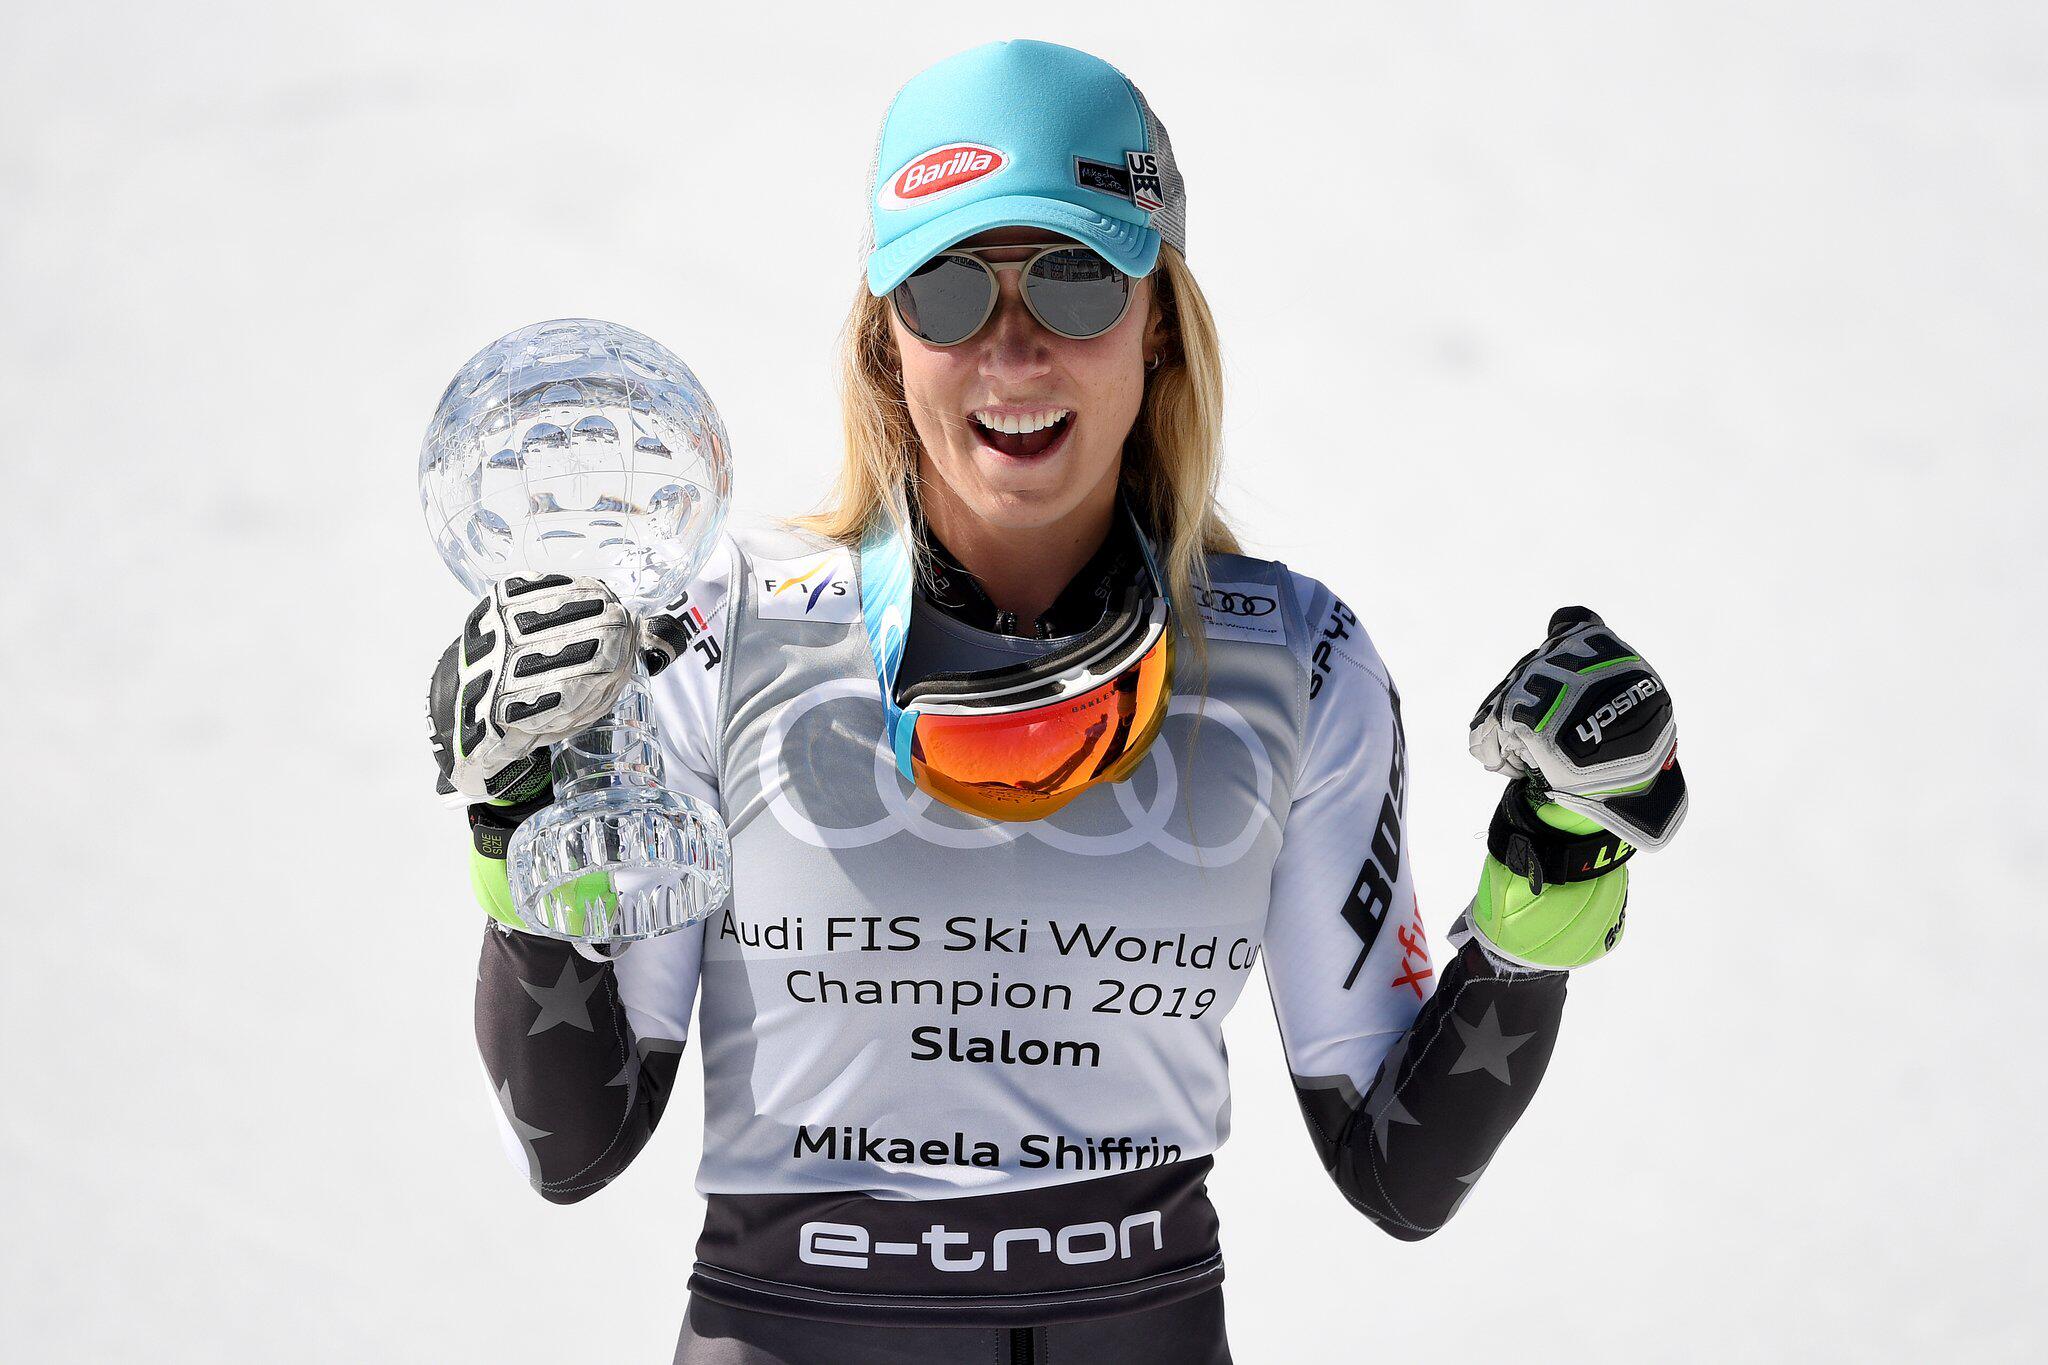 andrew selamat recommends Mikaela Shiffrin Ass